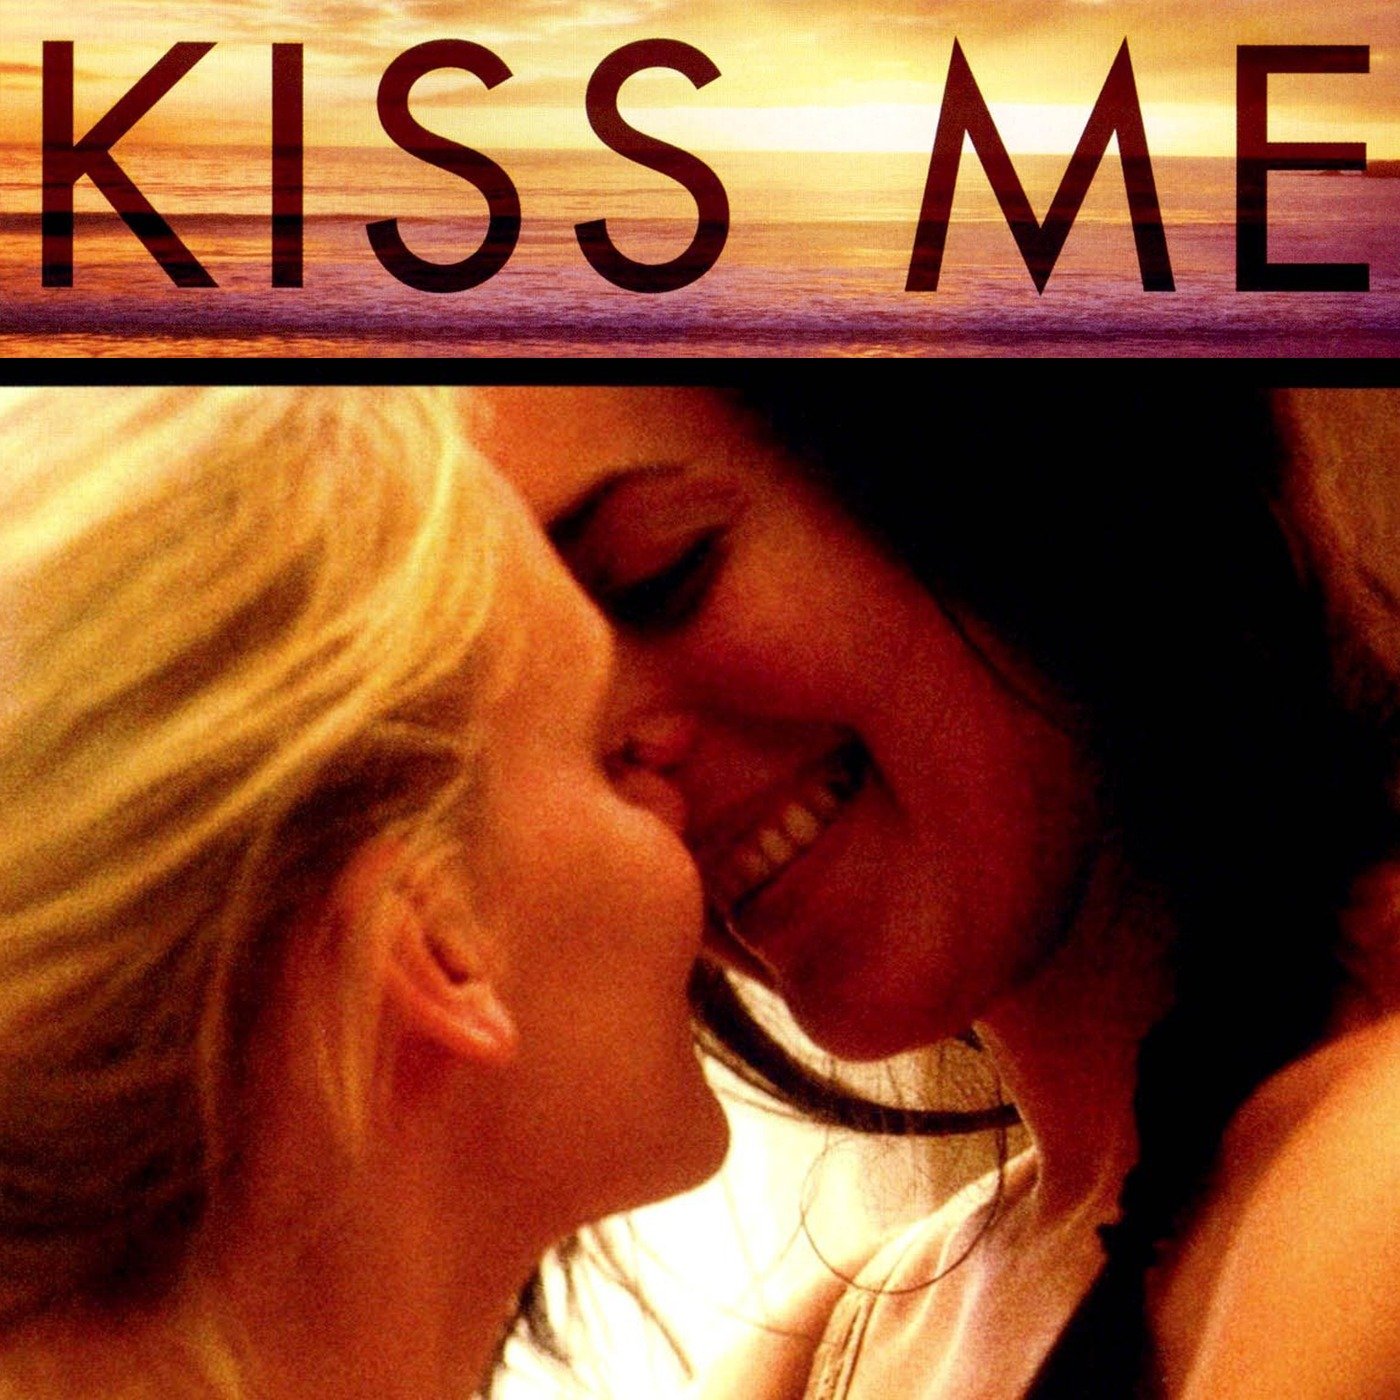 dianne cadiente recommends kiss me 2014 full movie pic